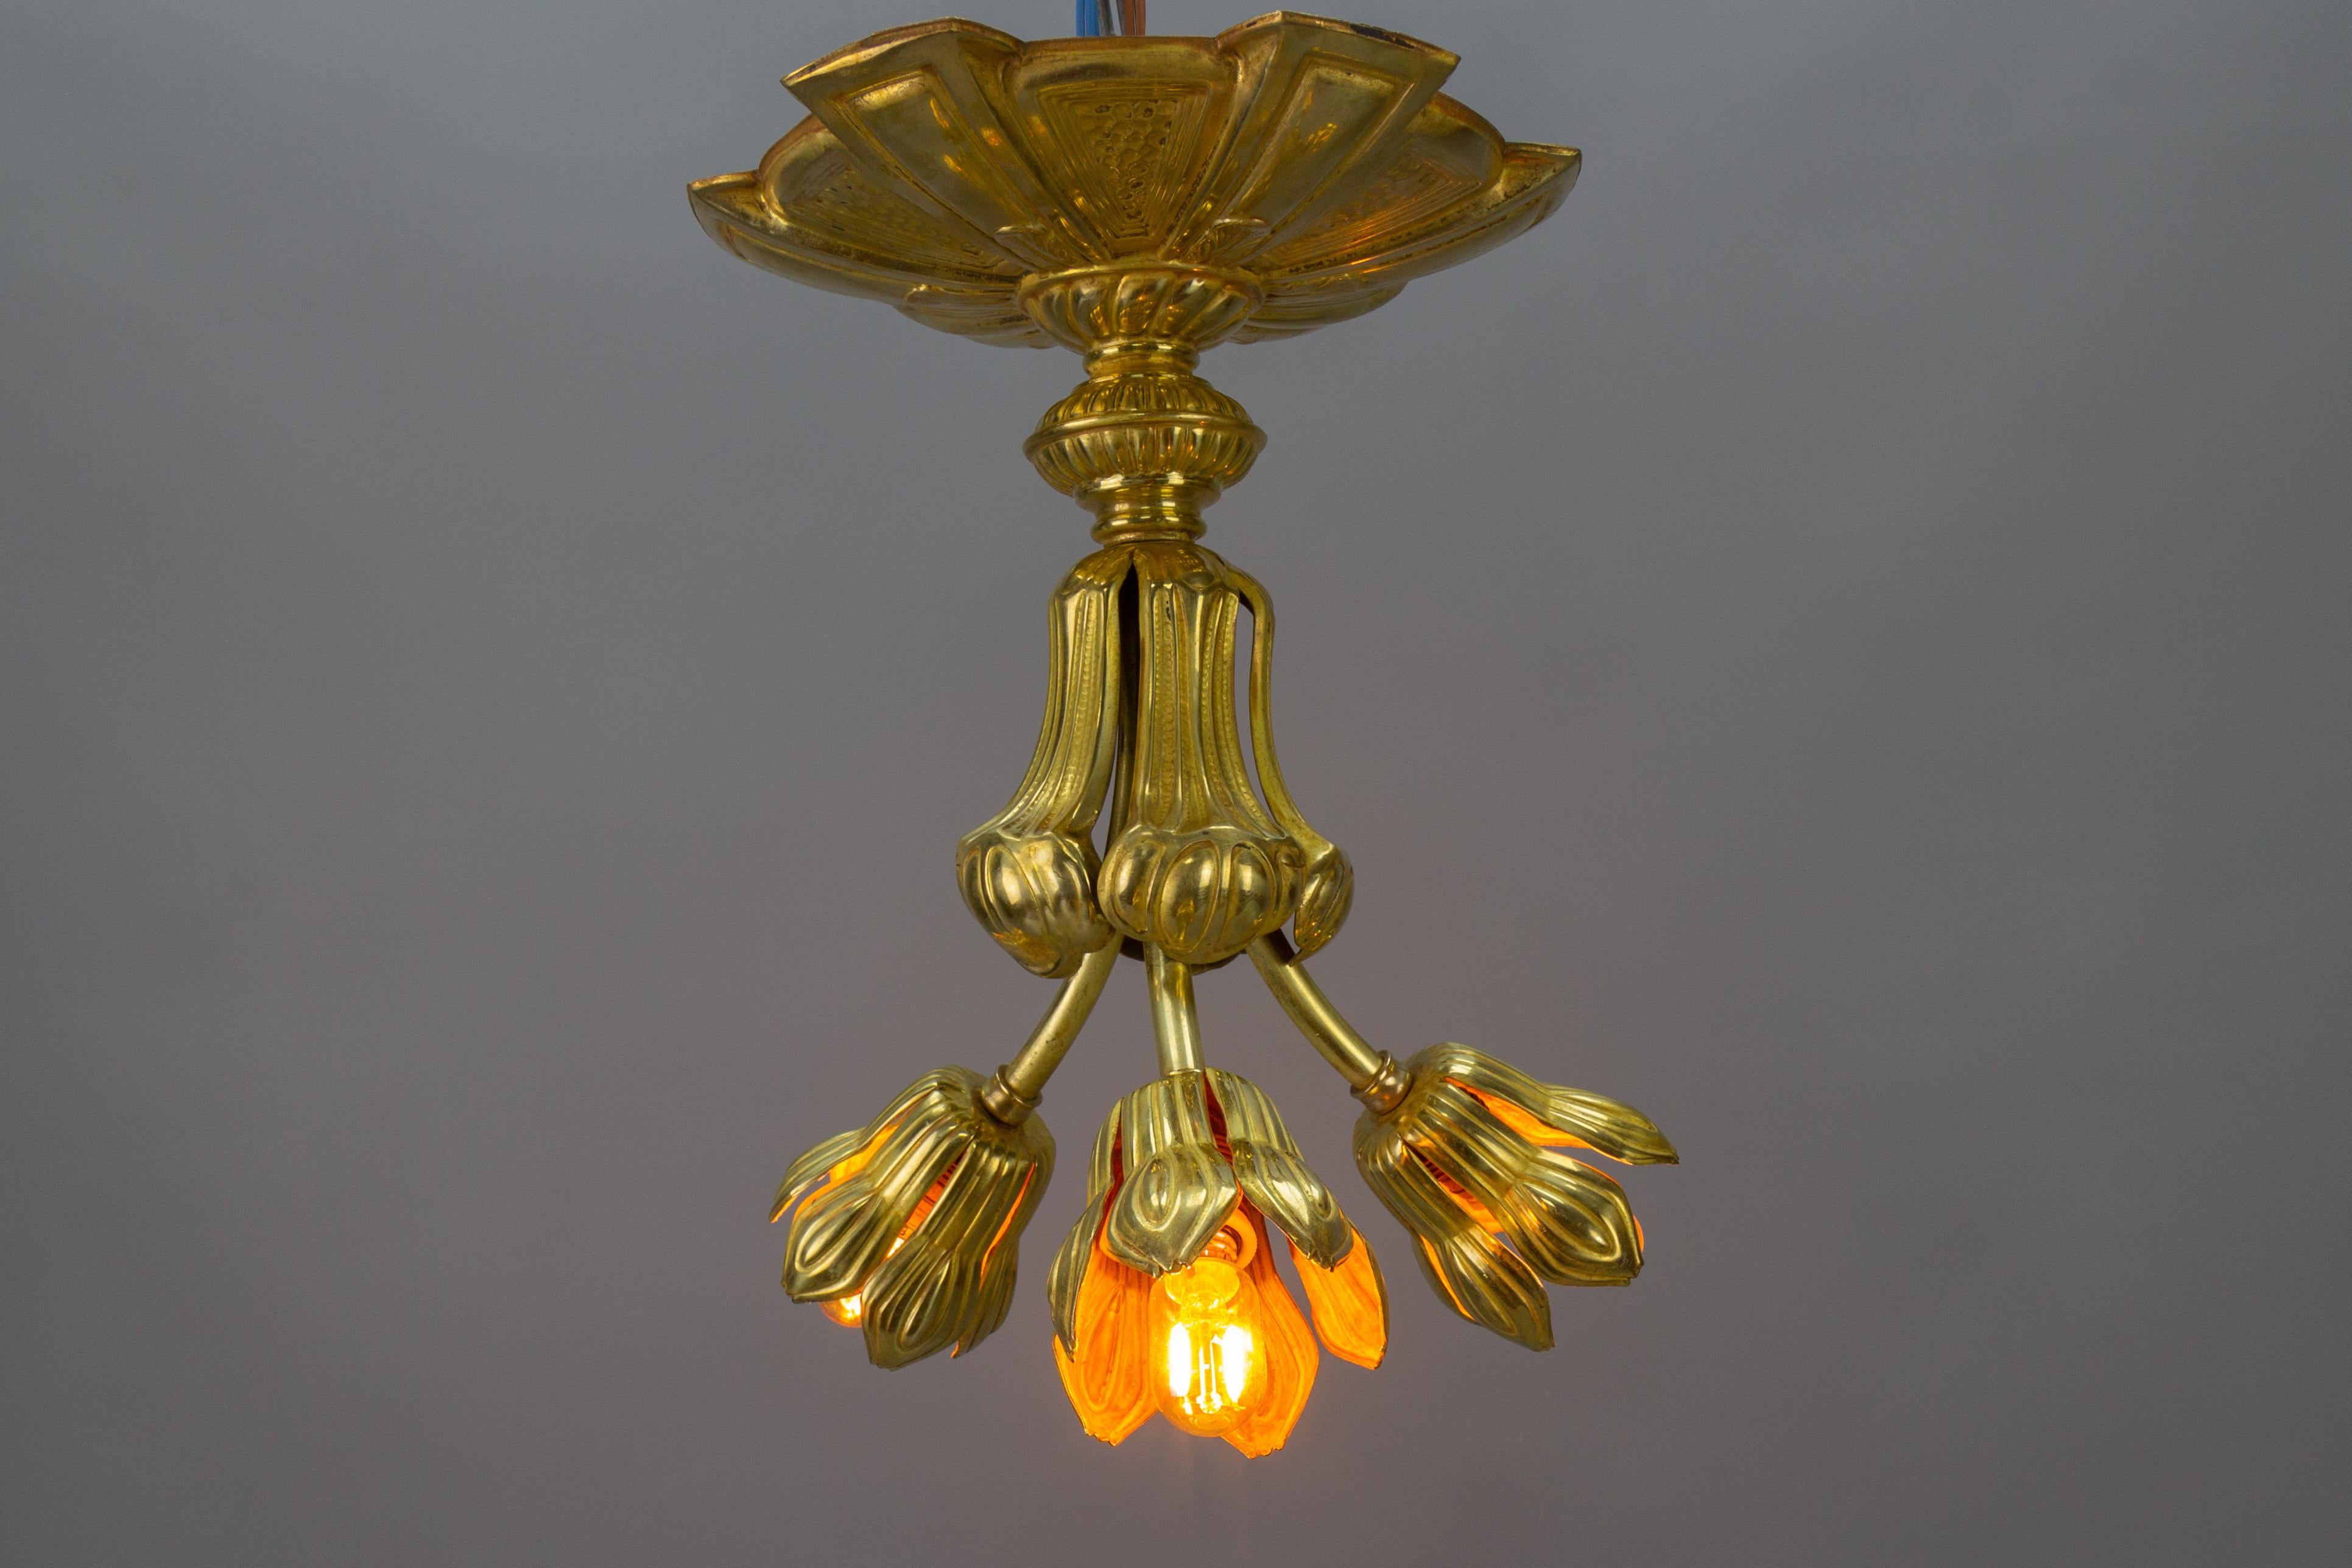  French Art Deco Three-Light Brass Ceiling Light Fixture, 1920s In Good Condition For Sale In Barntrup, DE